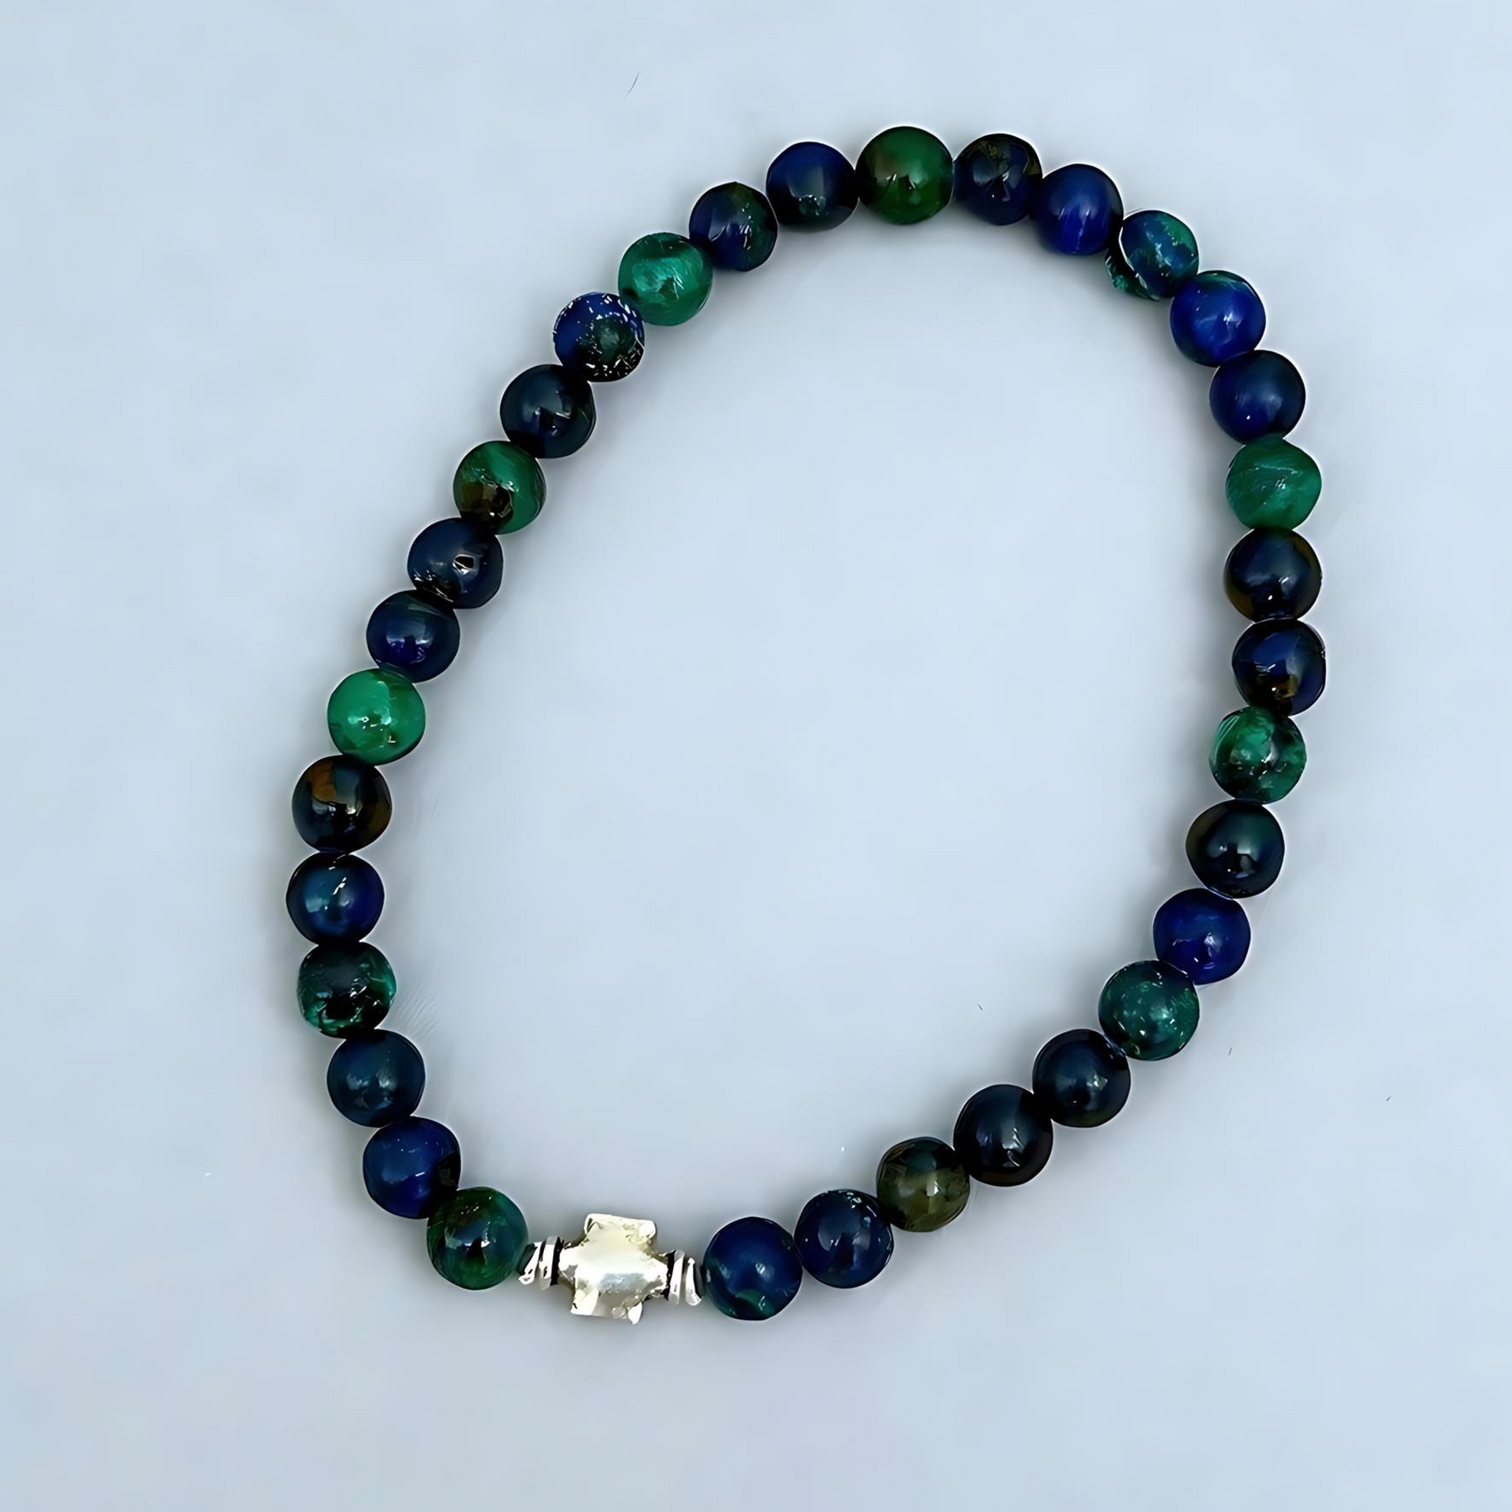 Le BijjouBijou Men Bracelet Shades of Blue made with Azurite Malachite and a touch of silver.